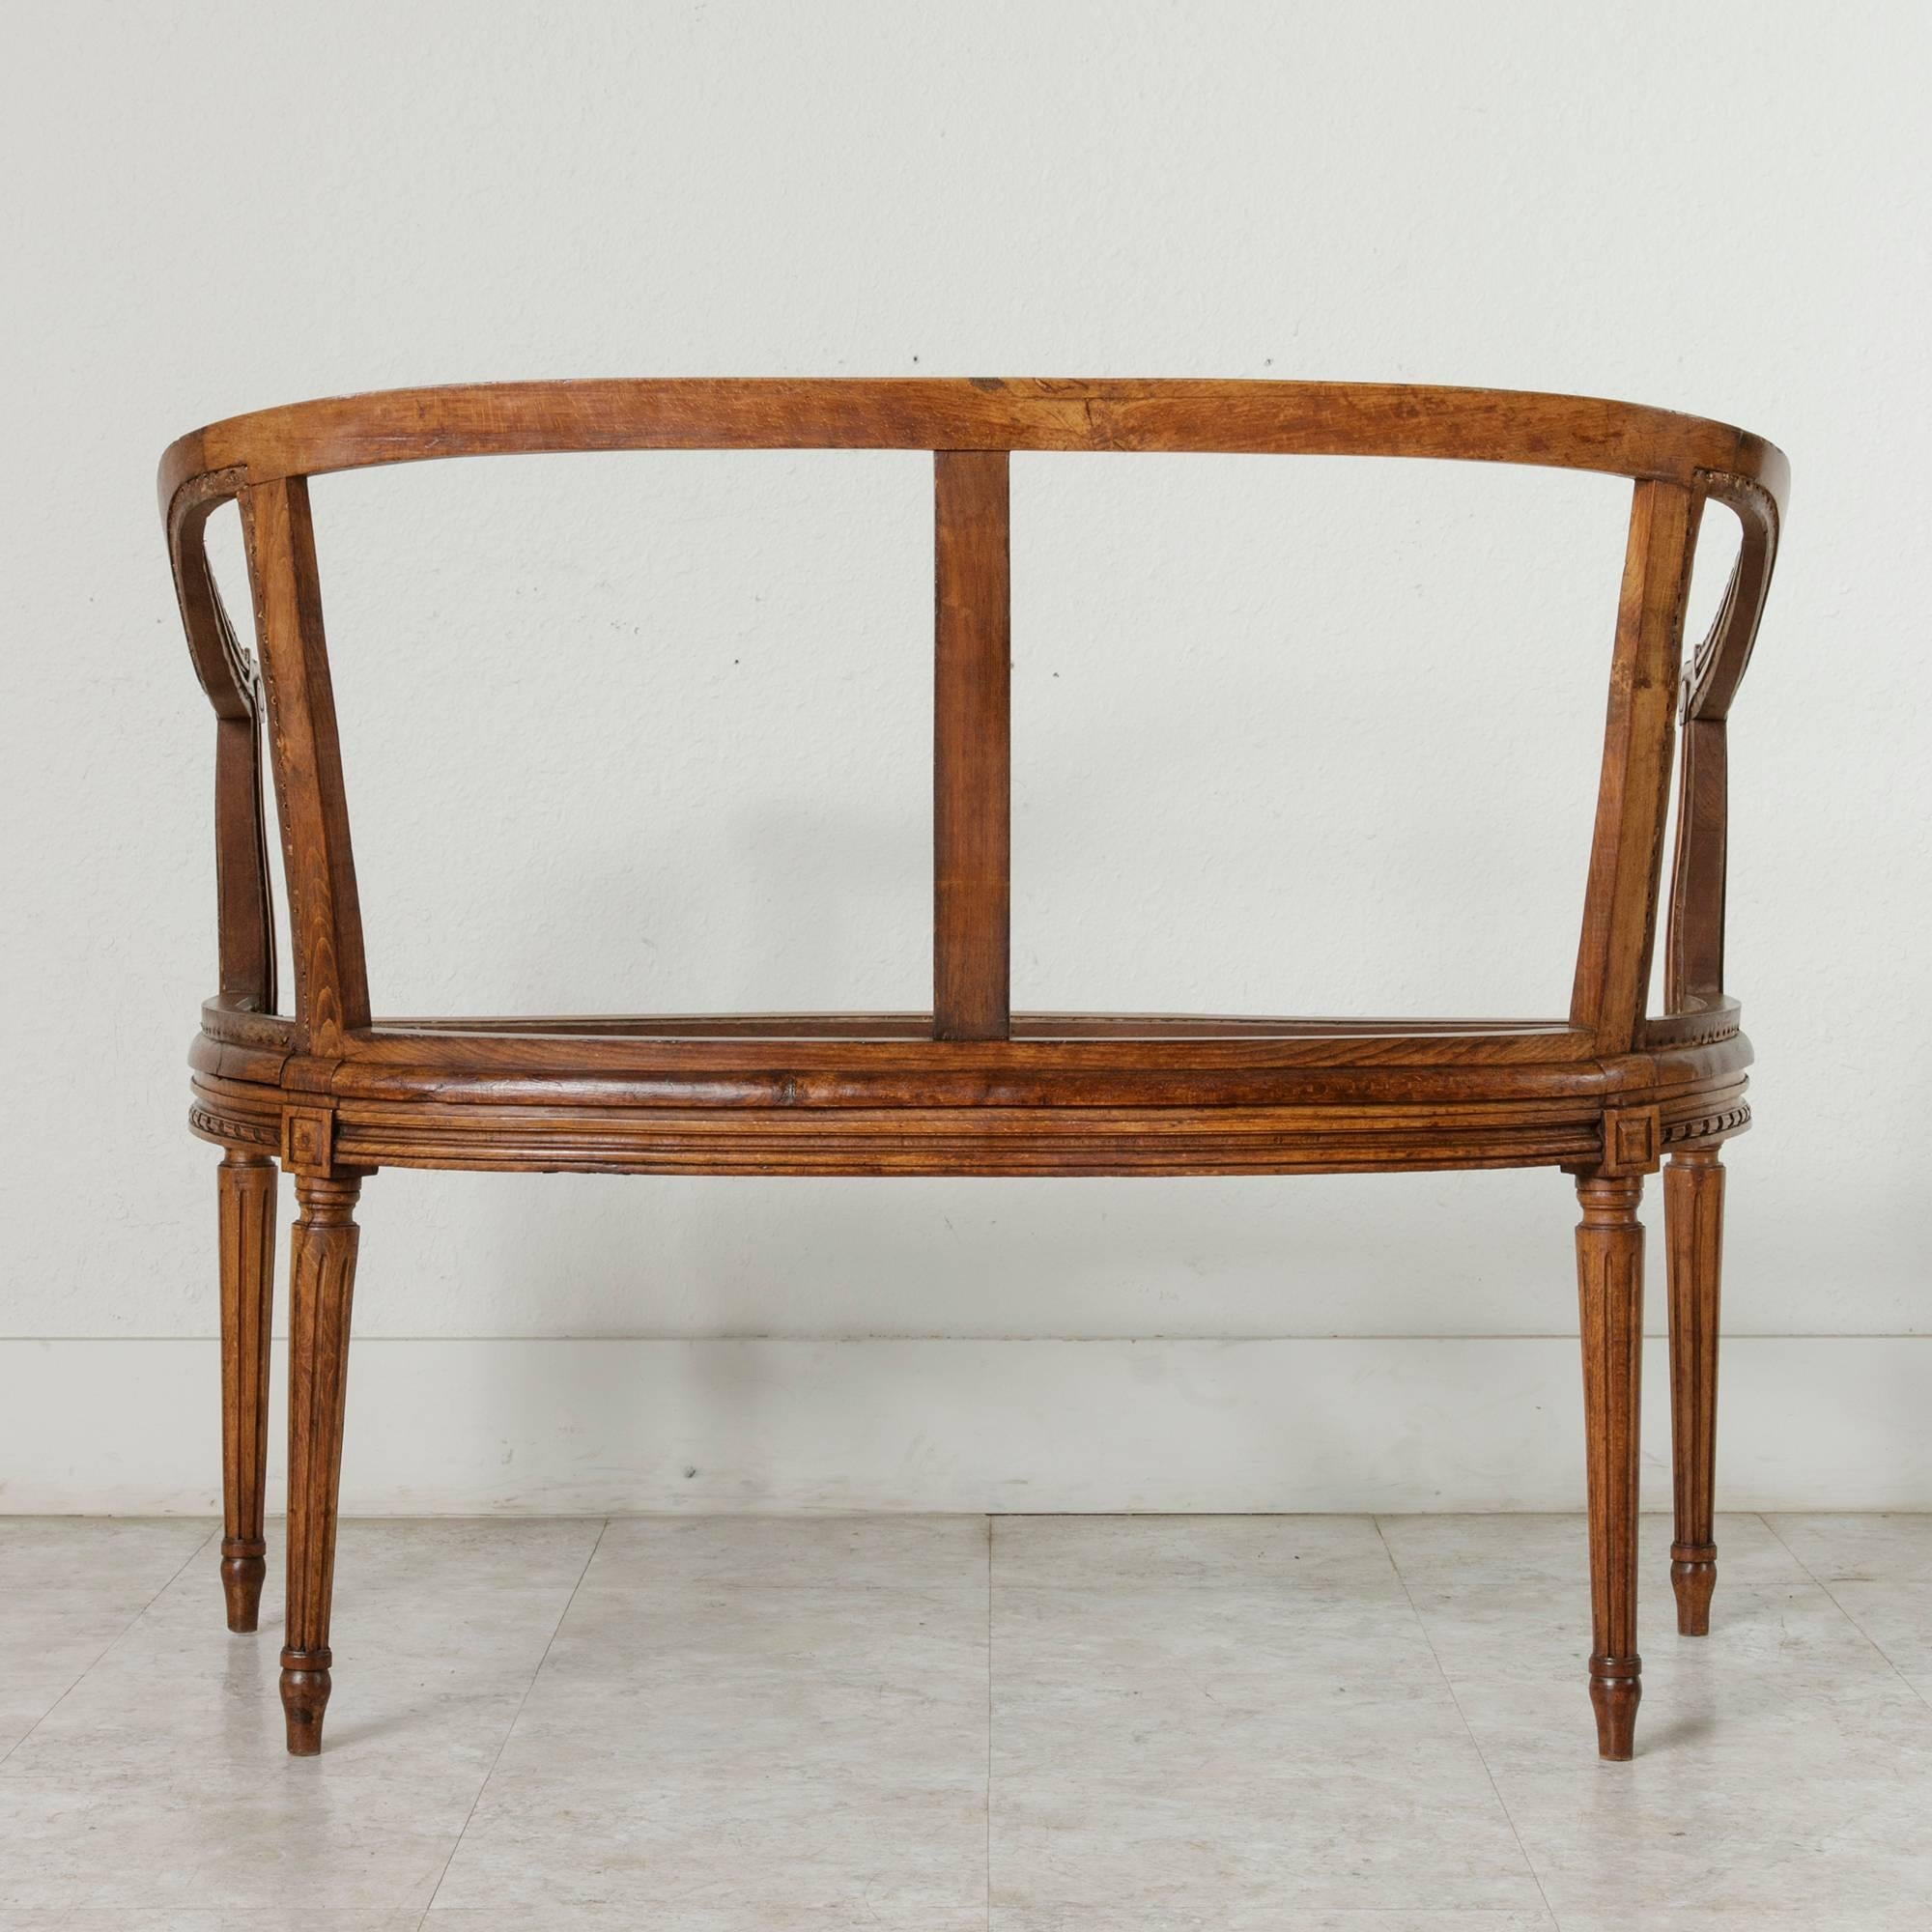 Late 19th Century French Louis XVI Style Hand-Carved Walnut Settee, Bench Frame 2